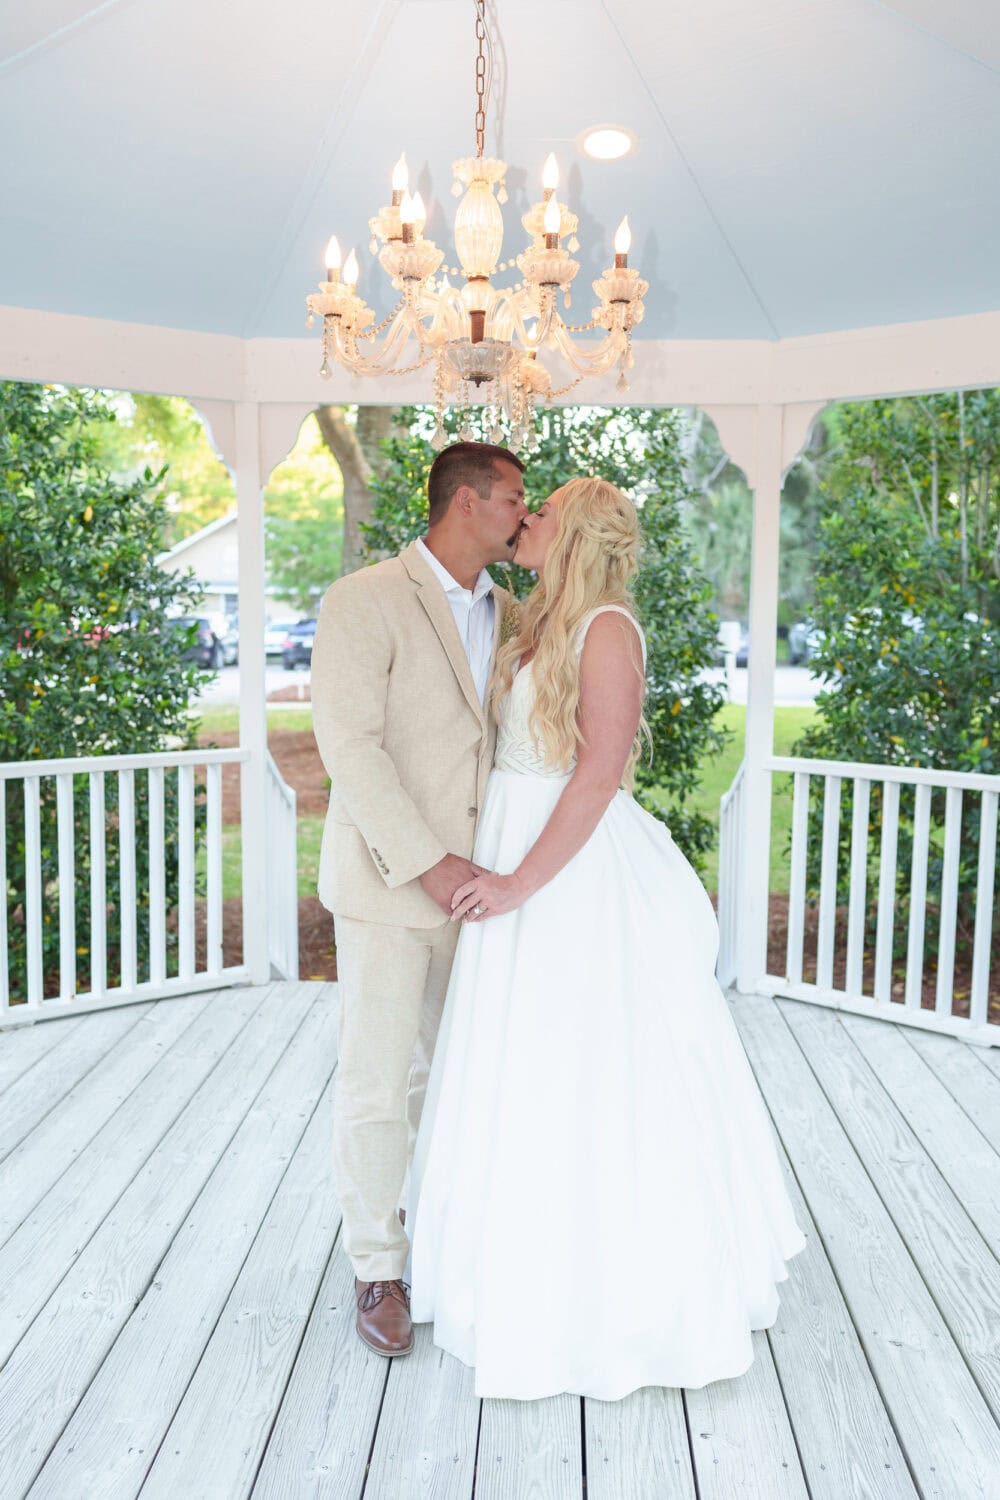 Kiss on the gazebo - The Village House at Litchfield